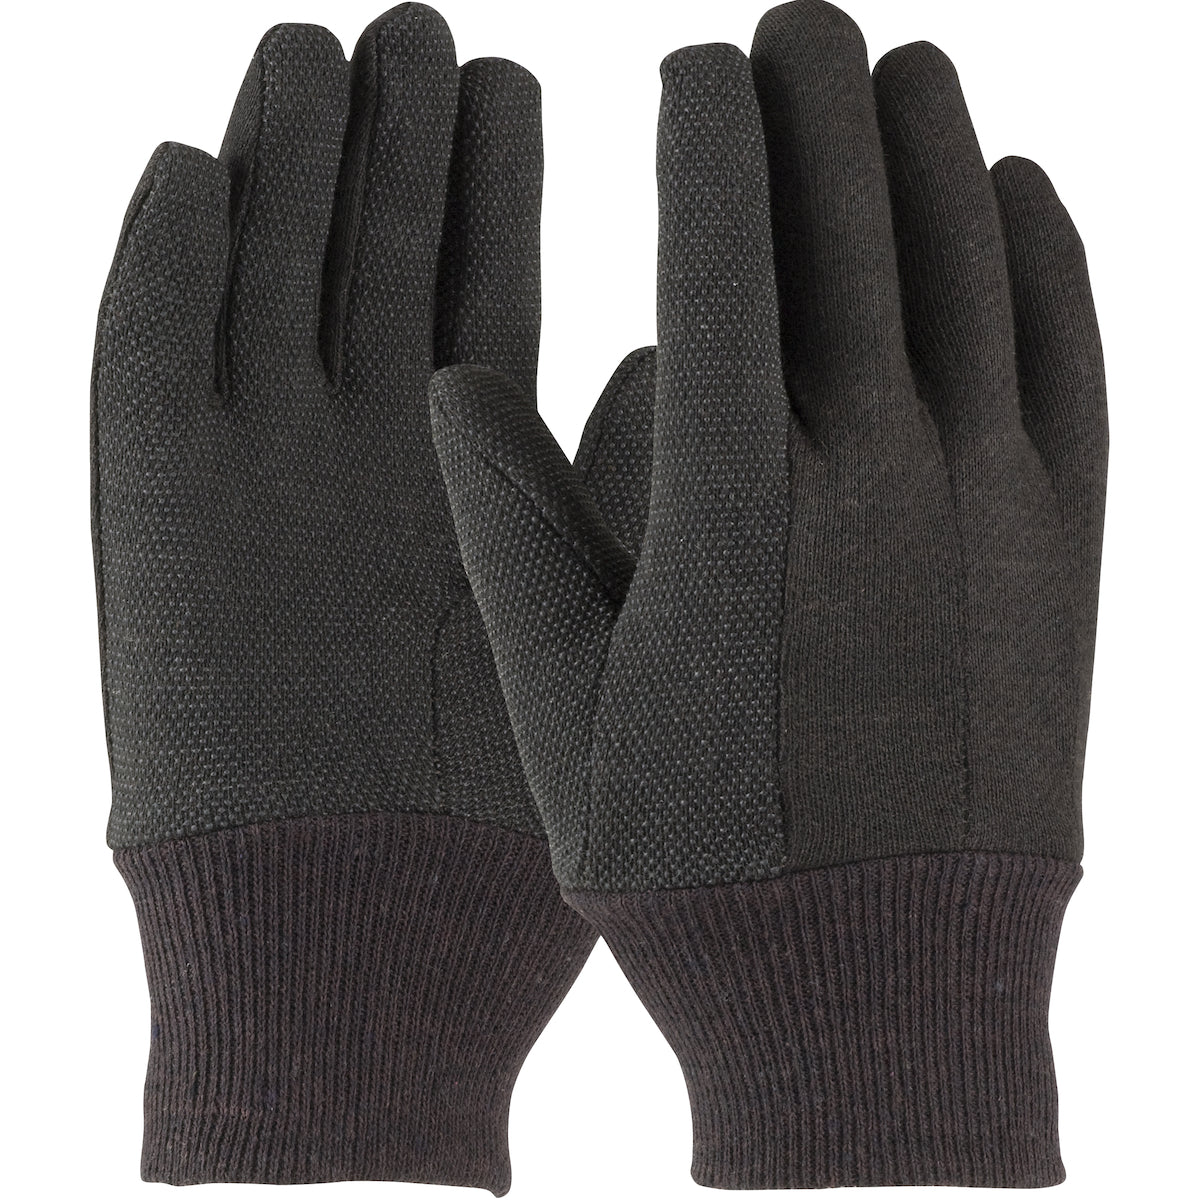 PIP 95-809PDC Regular Weight Polyester/Cotton Jersey Glove with PVC Dotted Grip - Ladies'